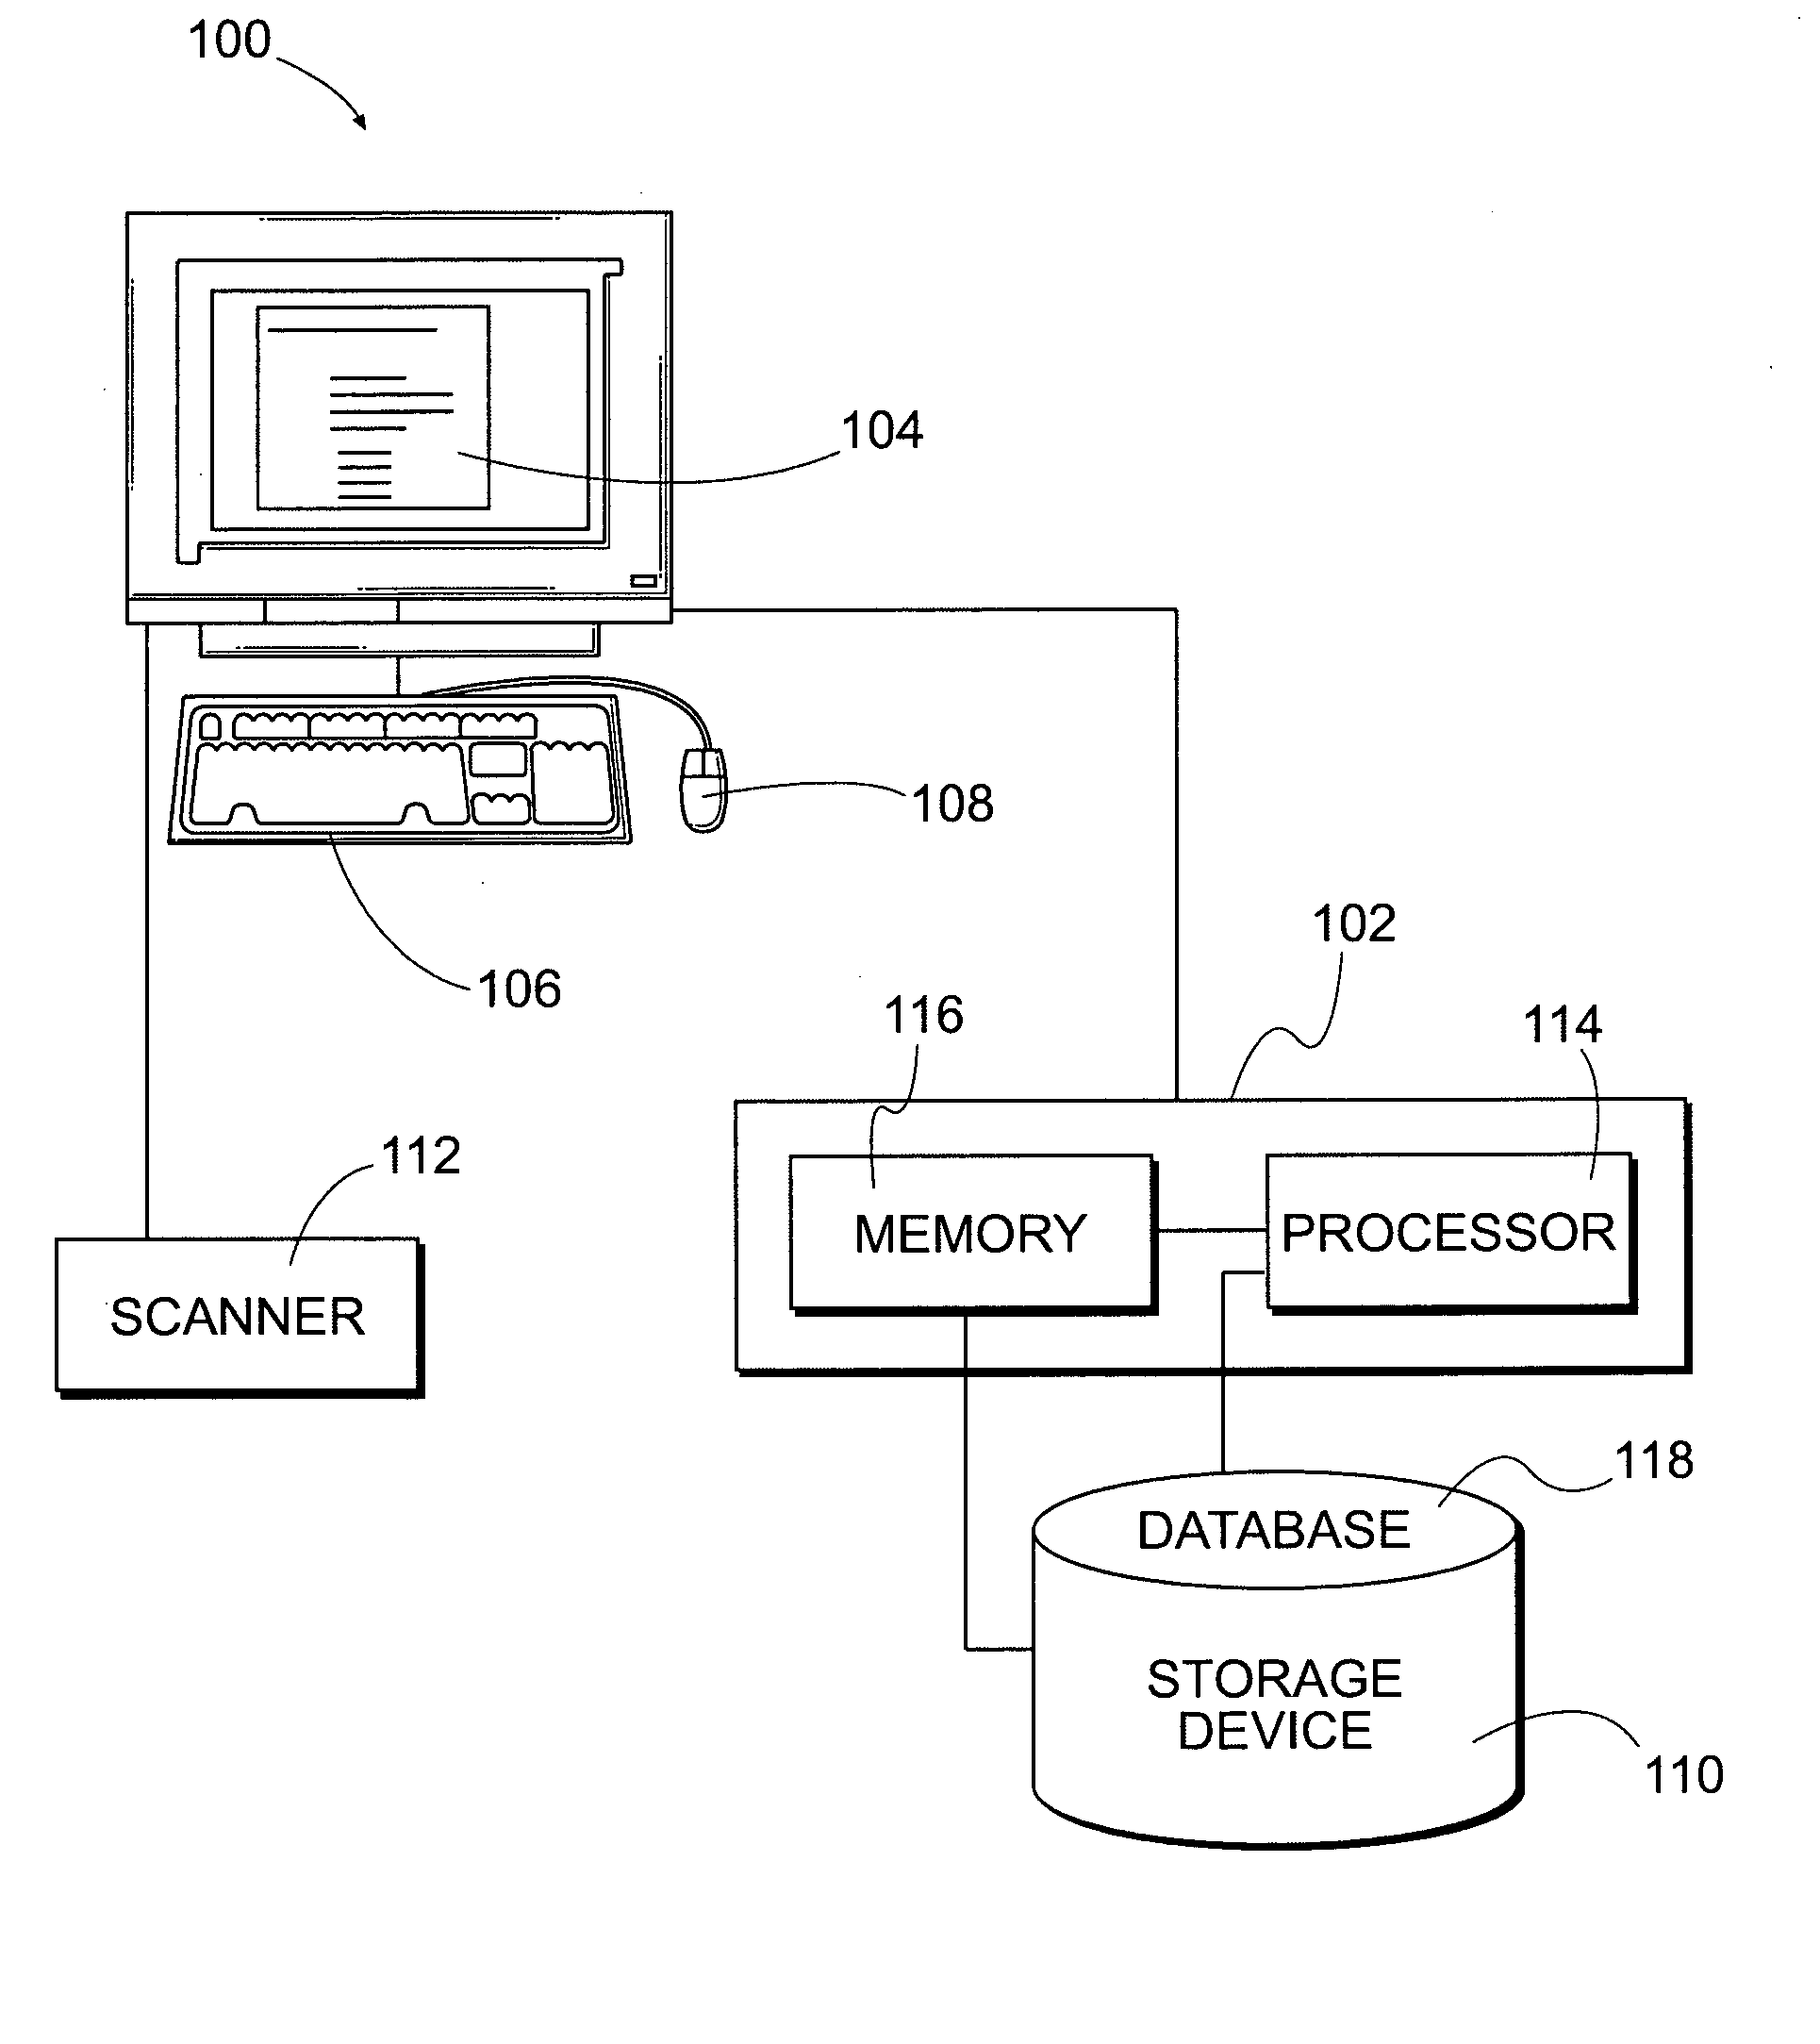 System and method for creating cross-reference links, tables and lead sheets for tax return documents